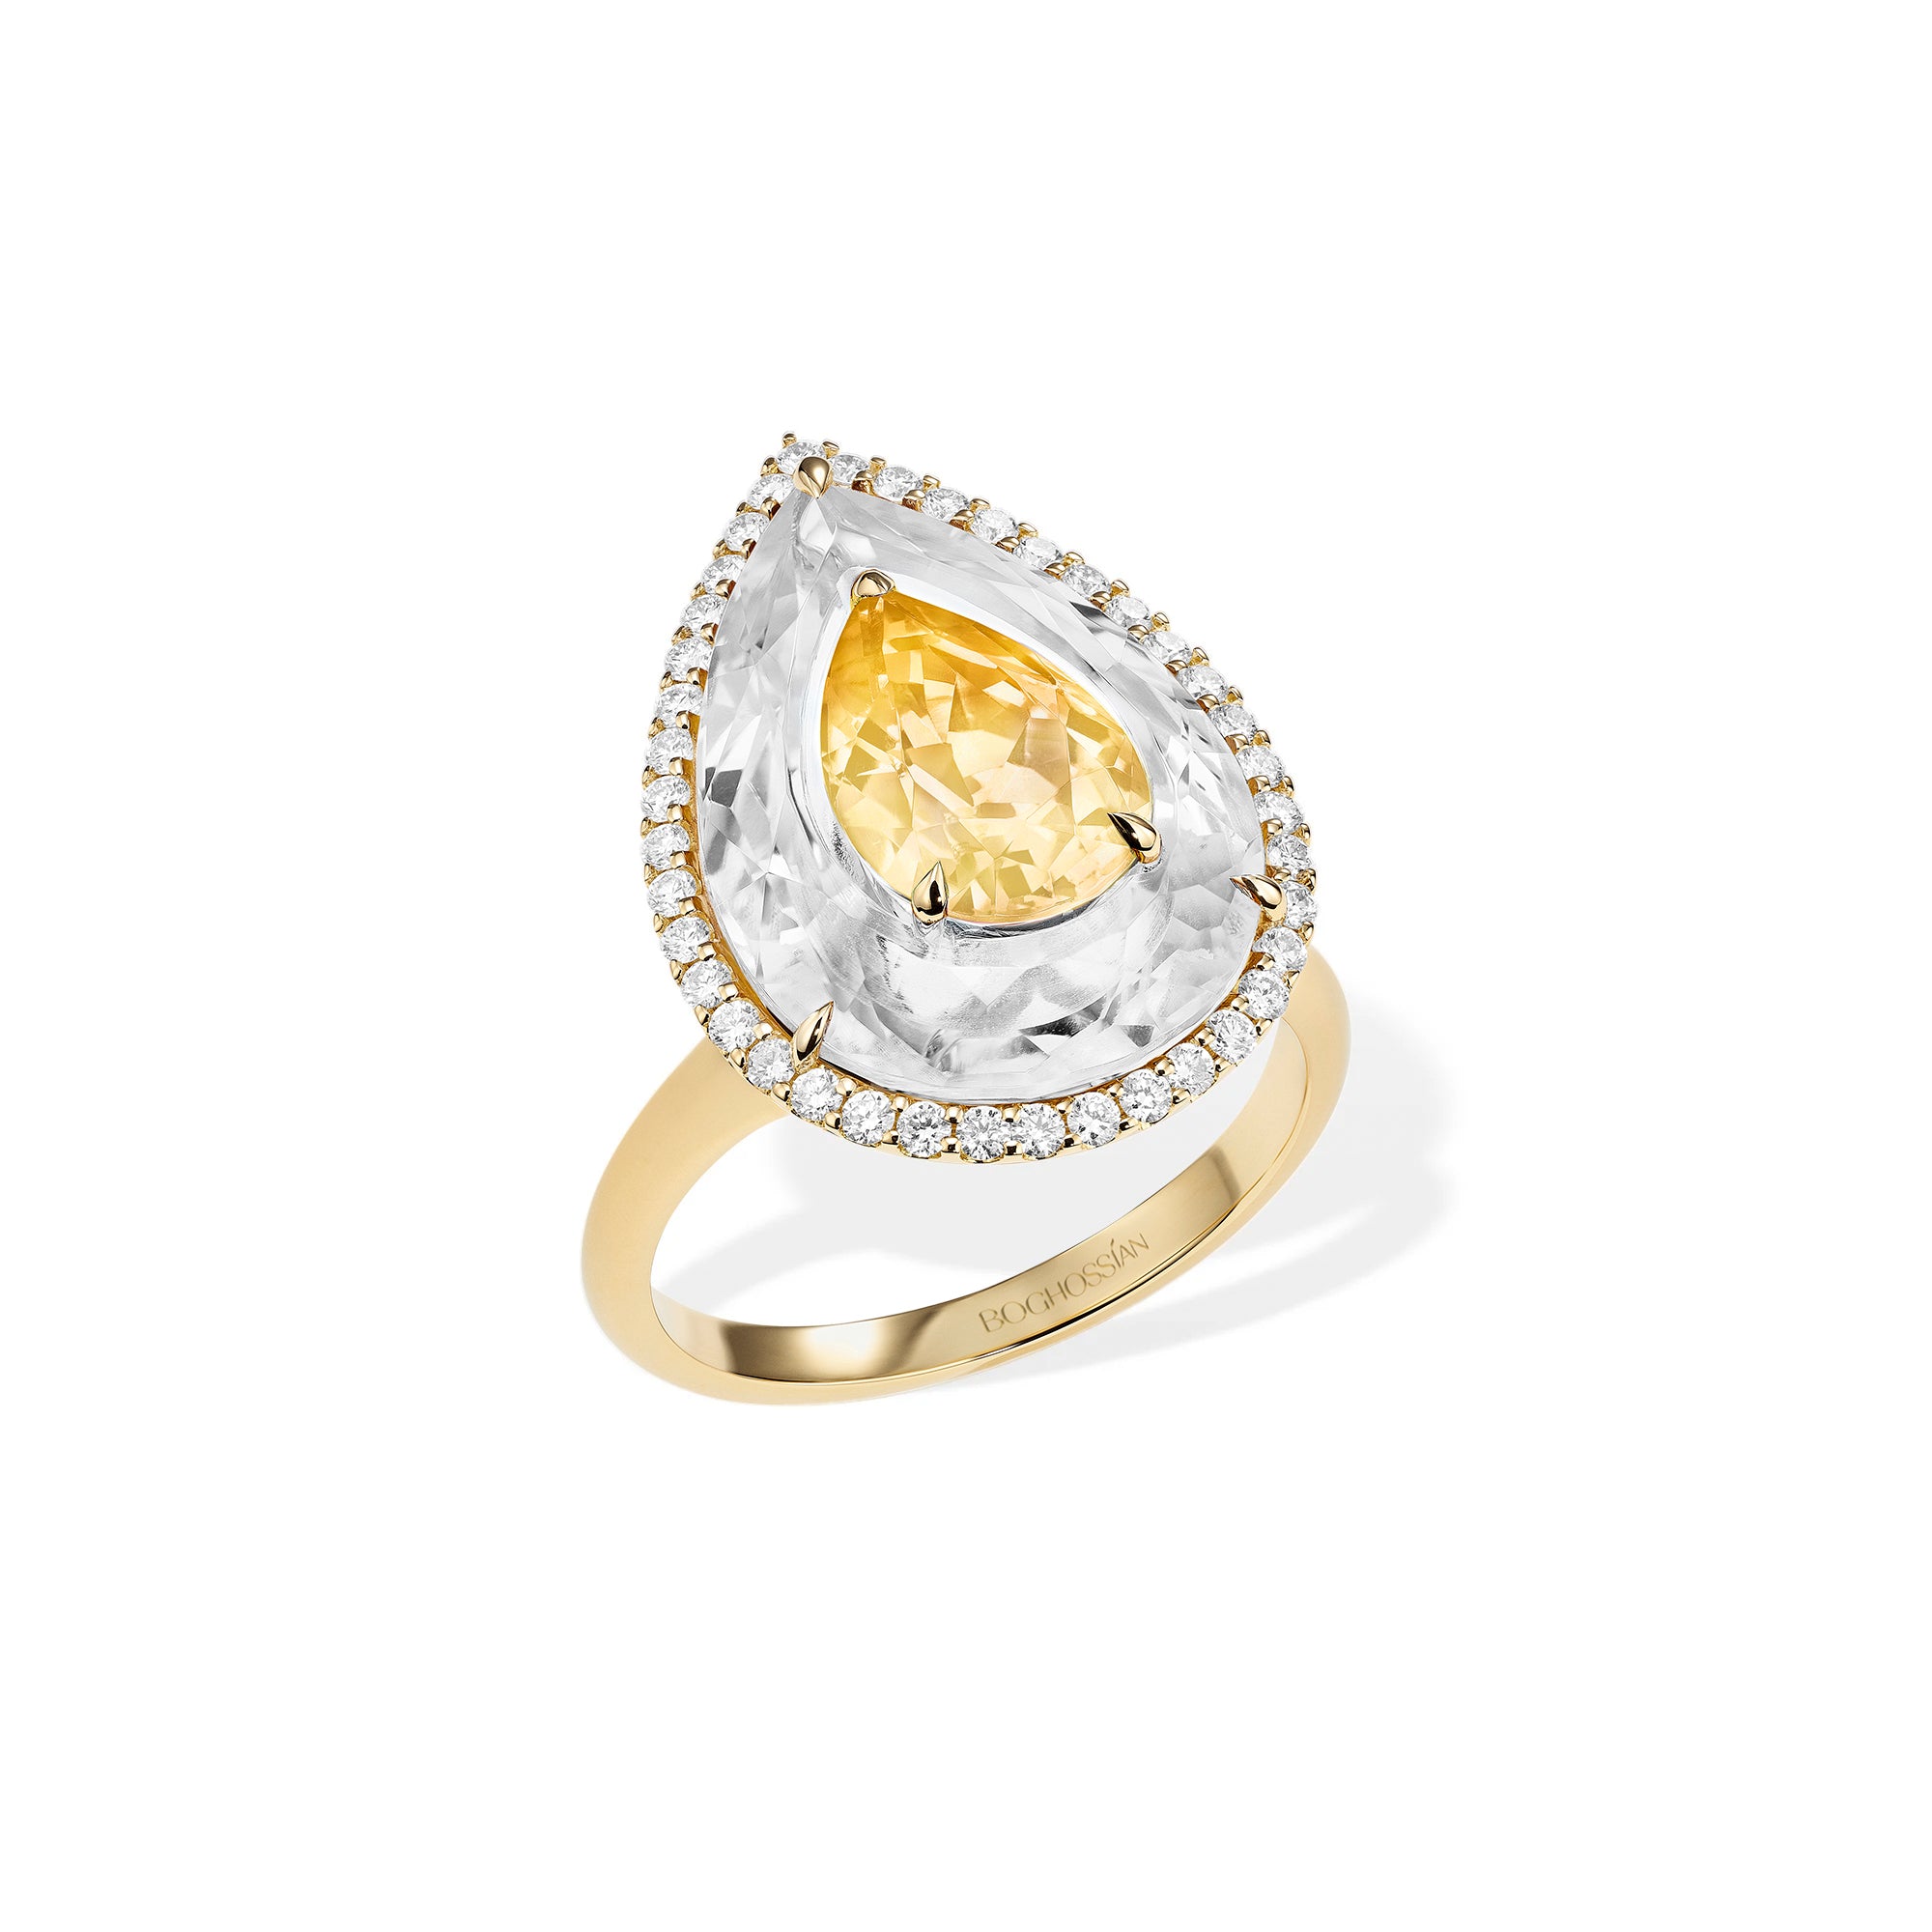 Shine - Citrine and Rock Crystal Ring